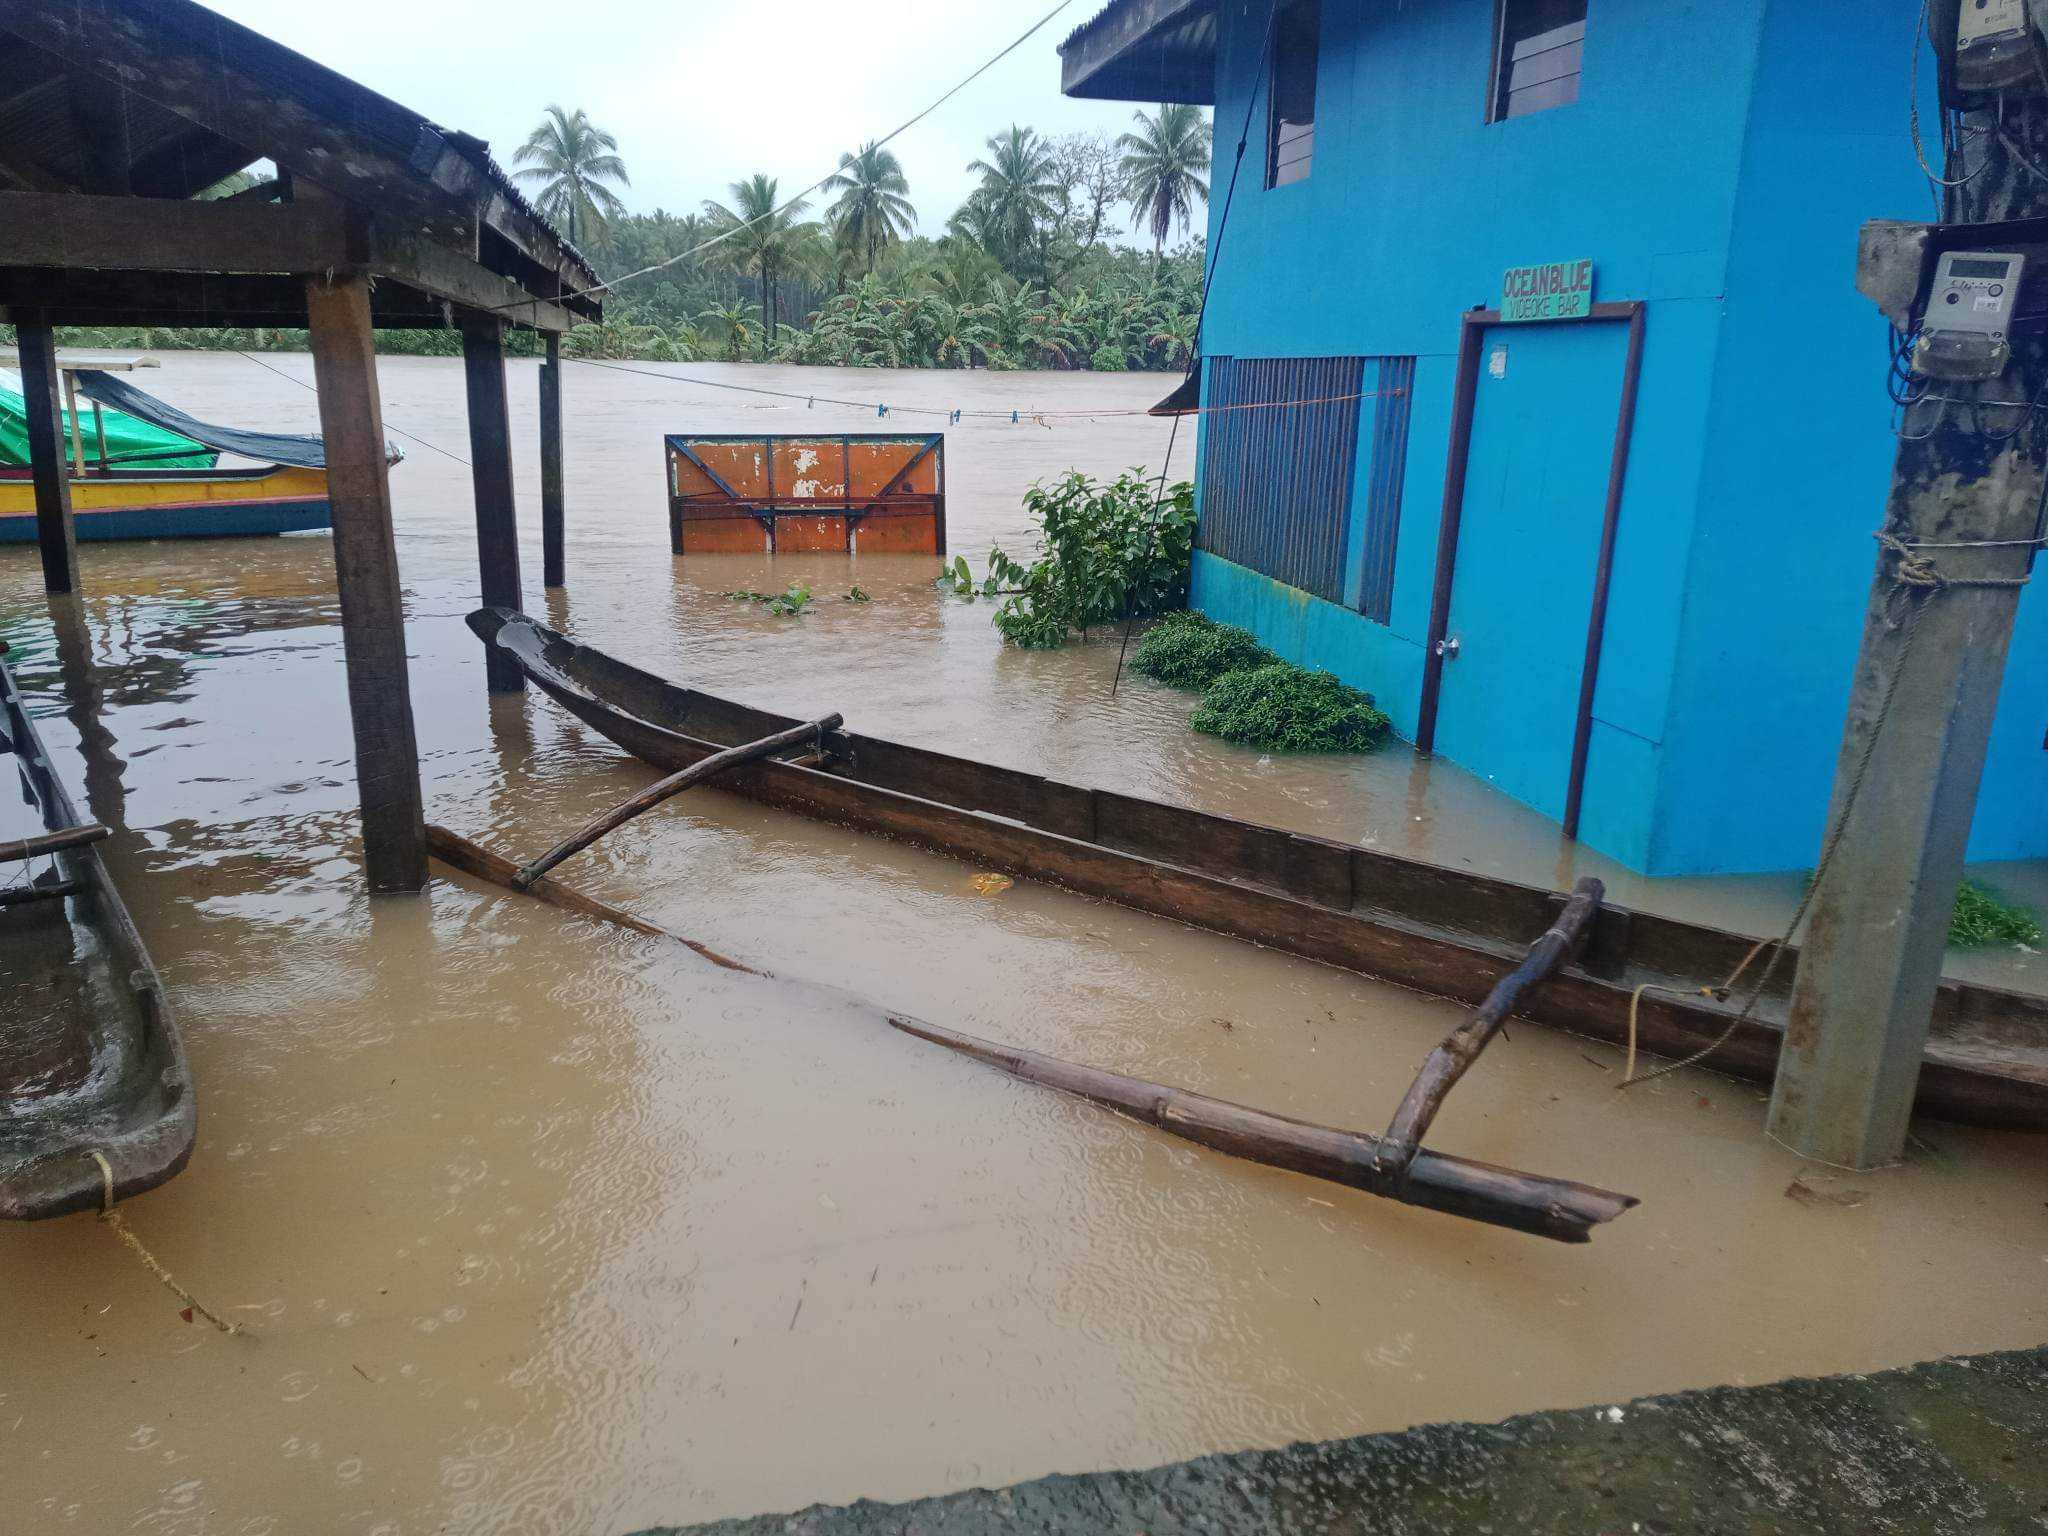 Eastern Samar placed under state of calamity due to massive flooding